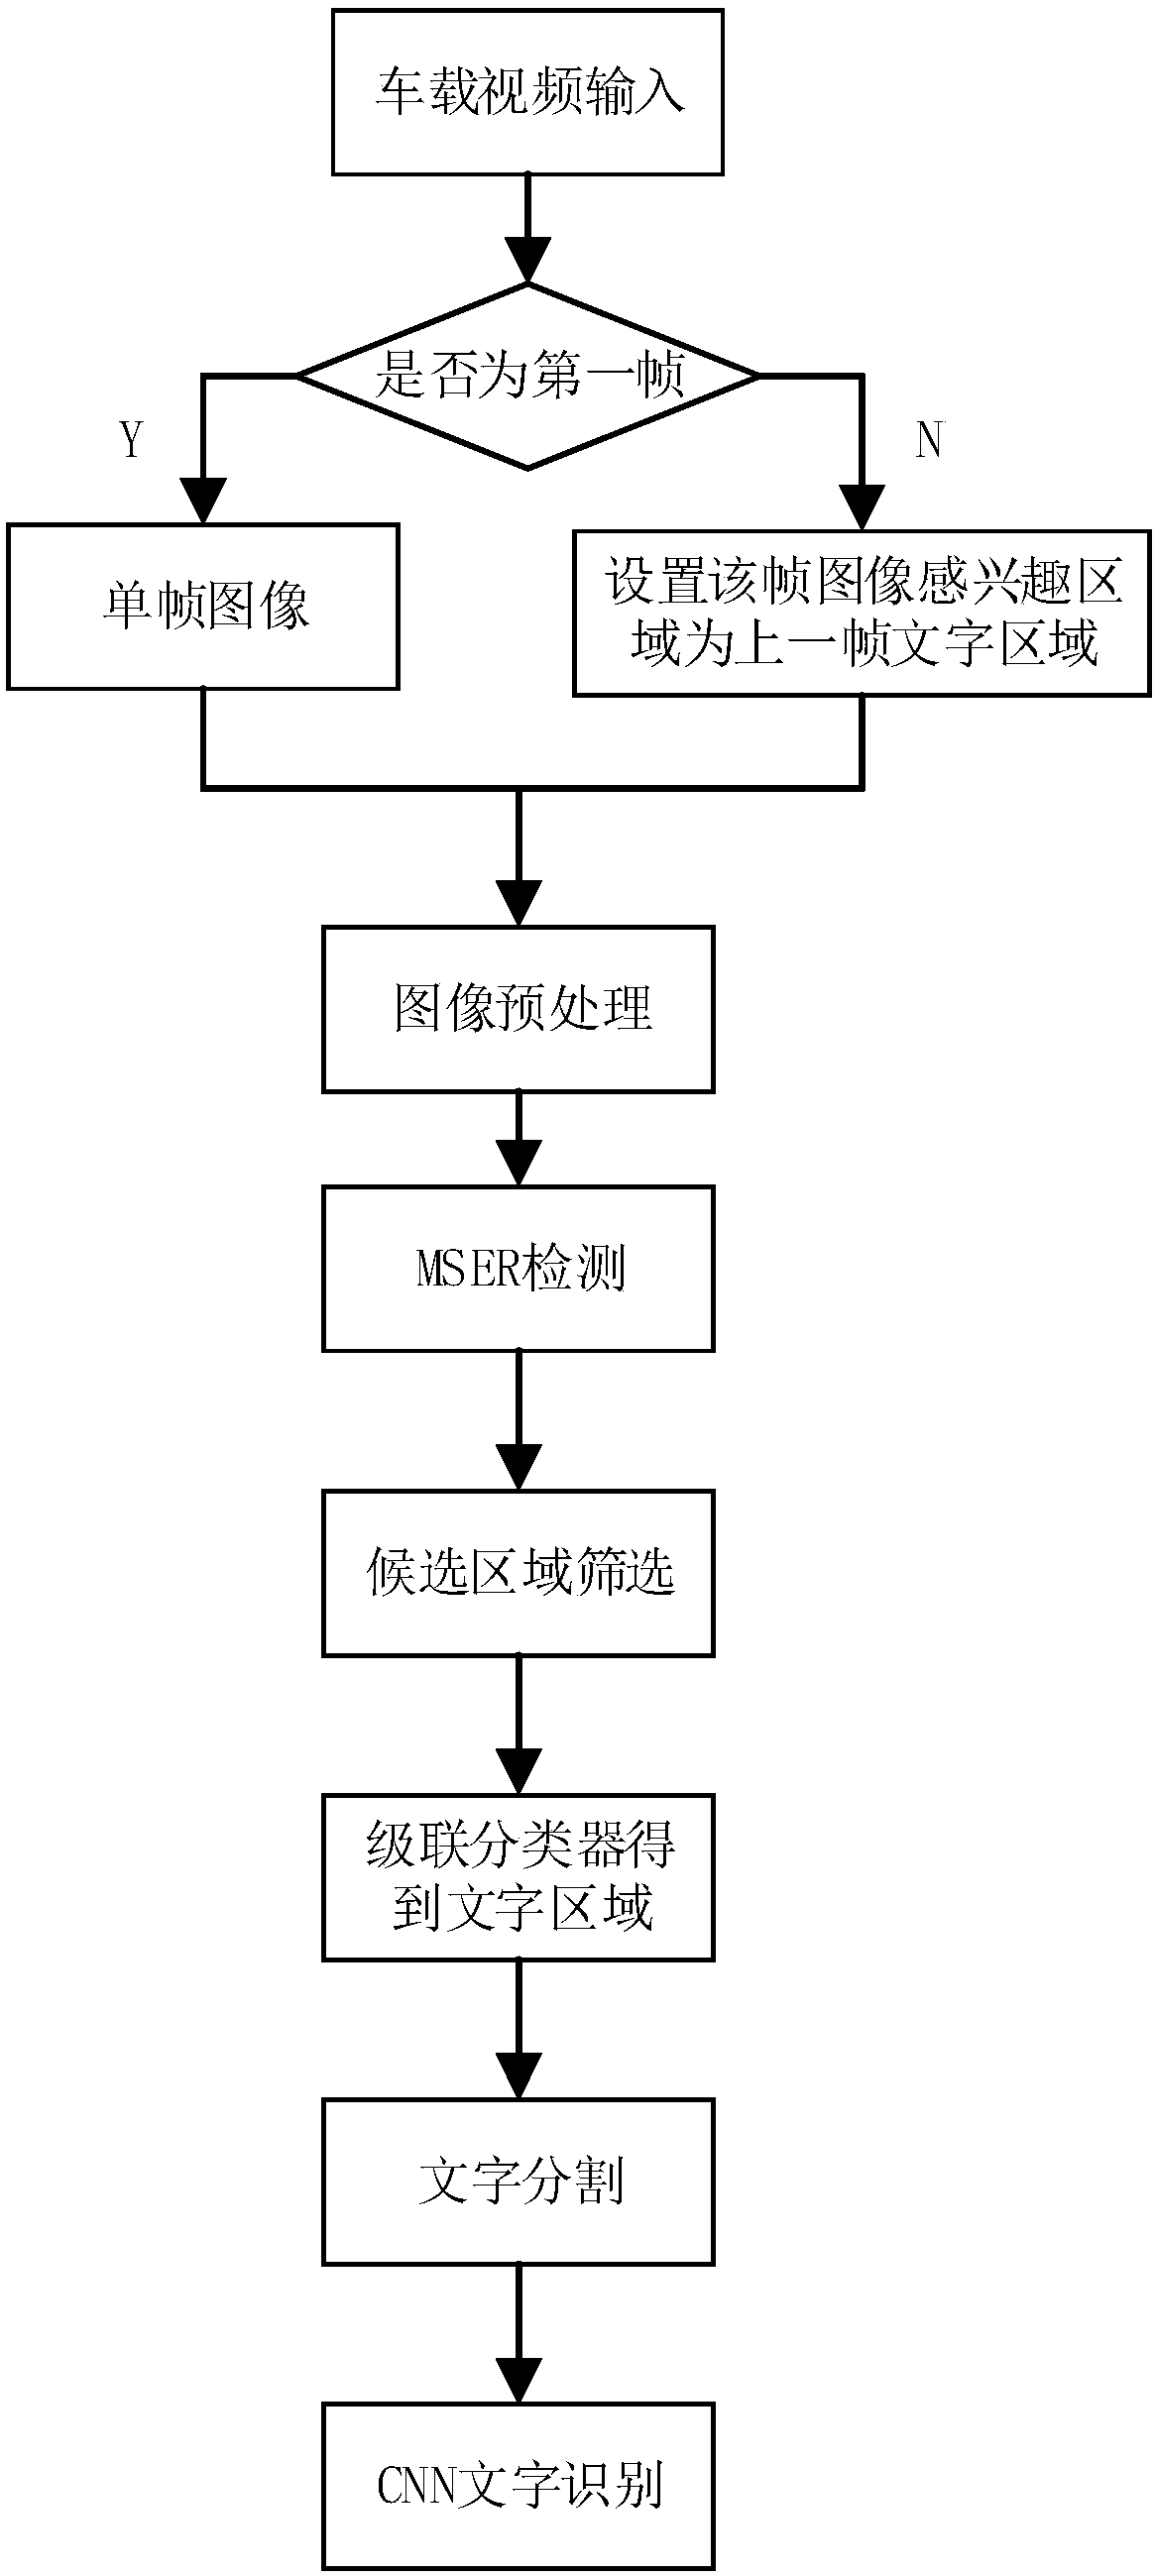 Traffic scene character recognition system and recognition method on basis of vehicle-mounted videos